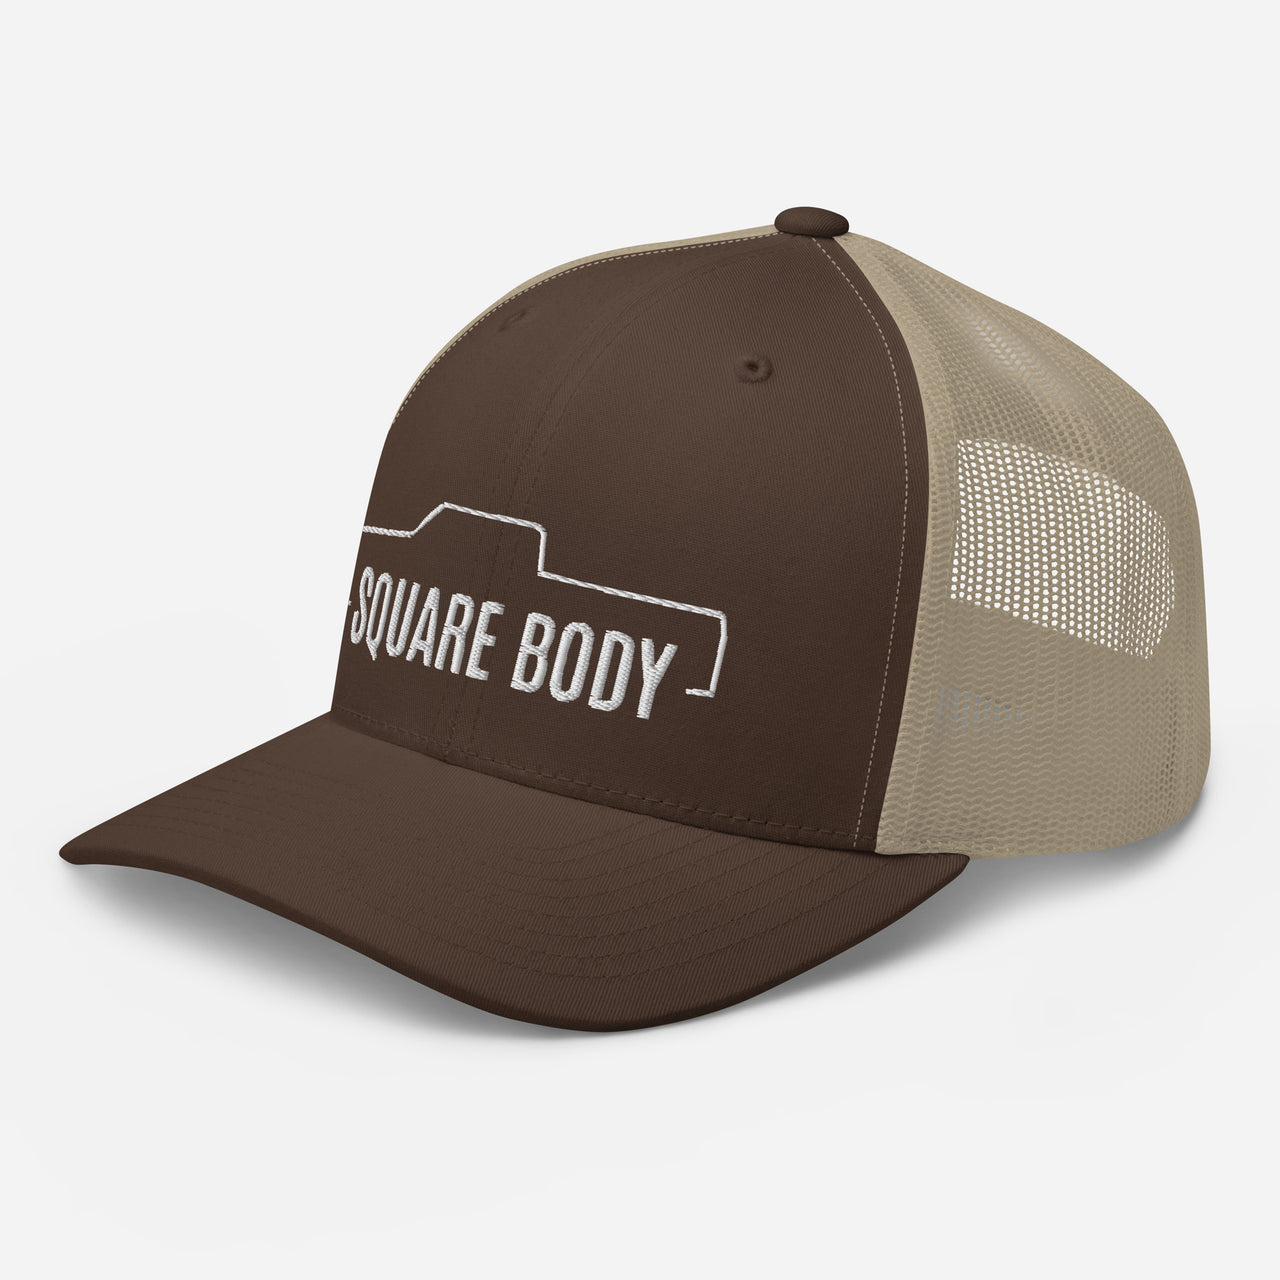 3/4 view of Crew Cab Square Body Trucker Hat From Aggressive Thread in Brown